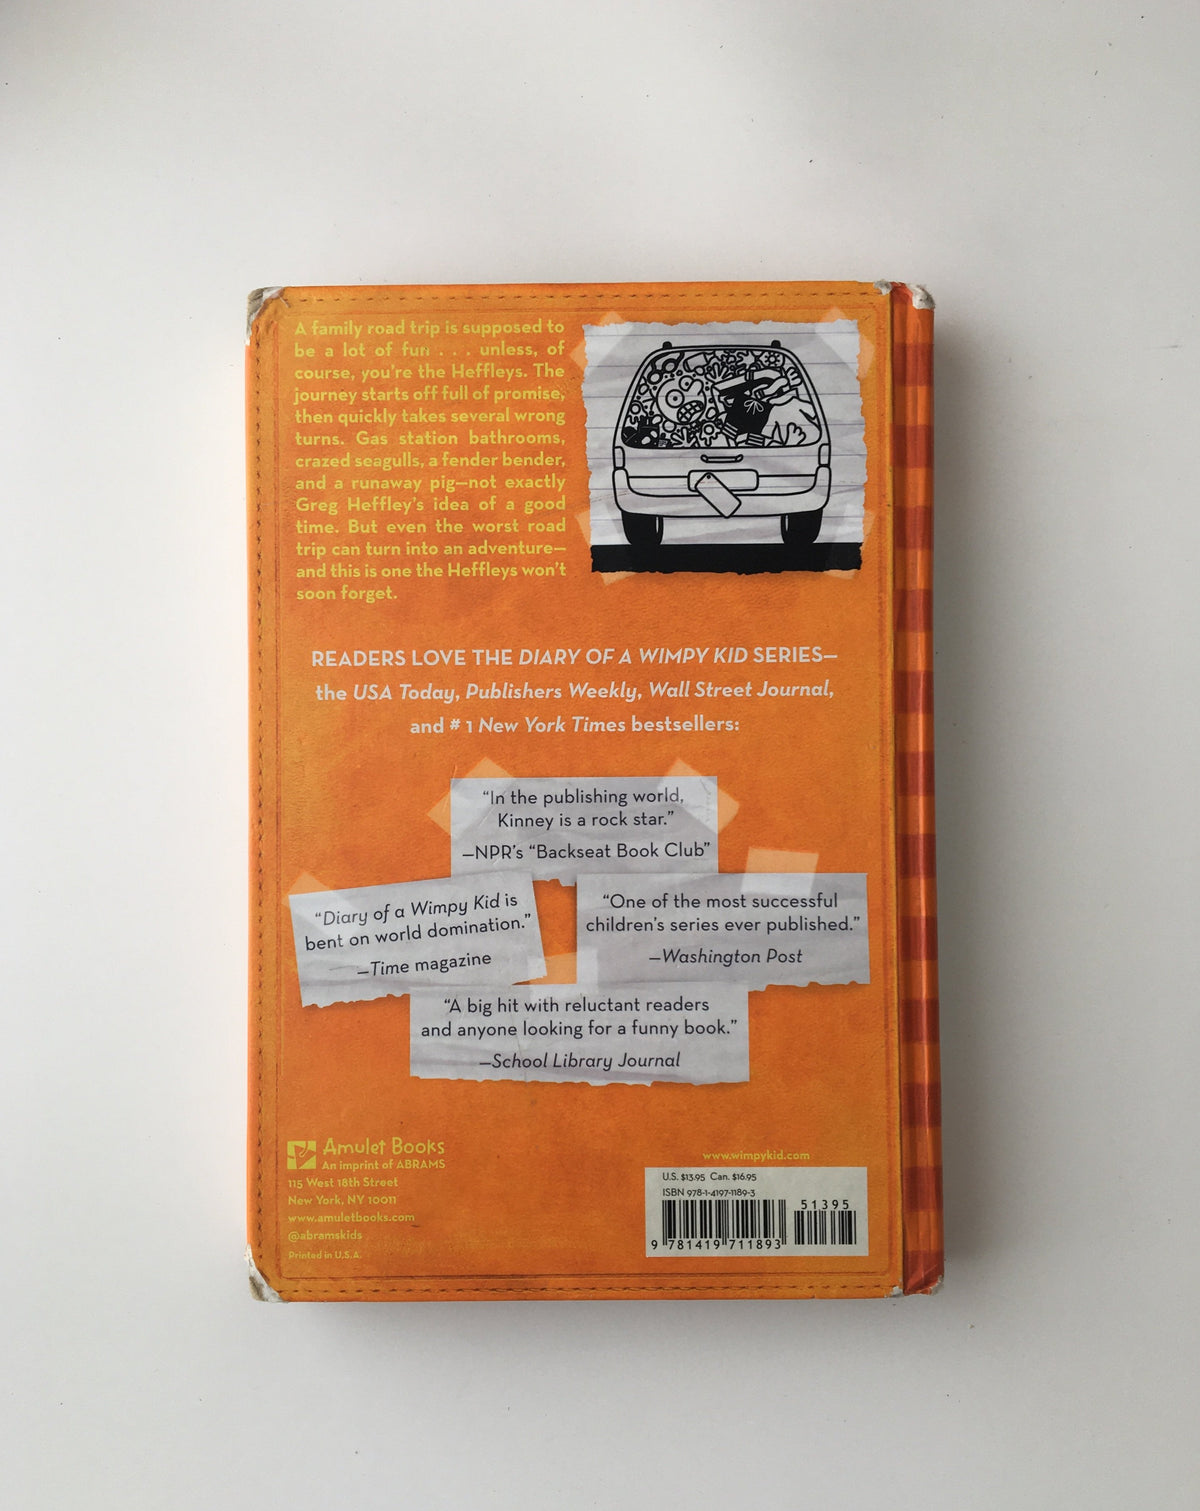 Diary of a Wimpy Kid: The Long Haul by Jeff Kinney